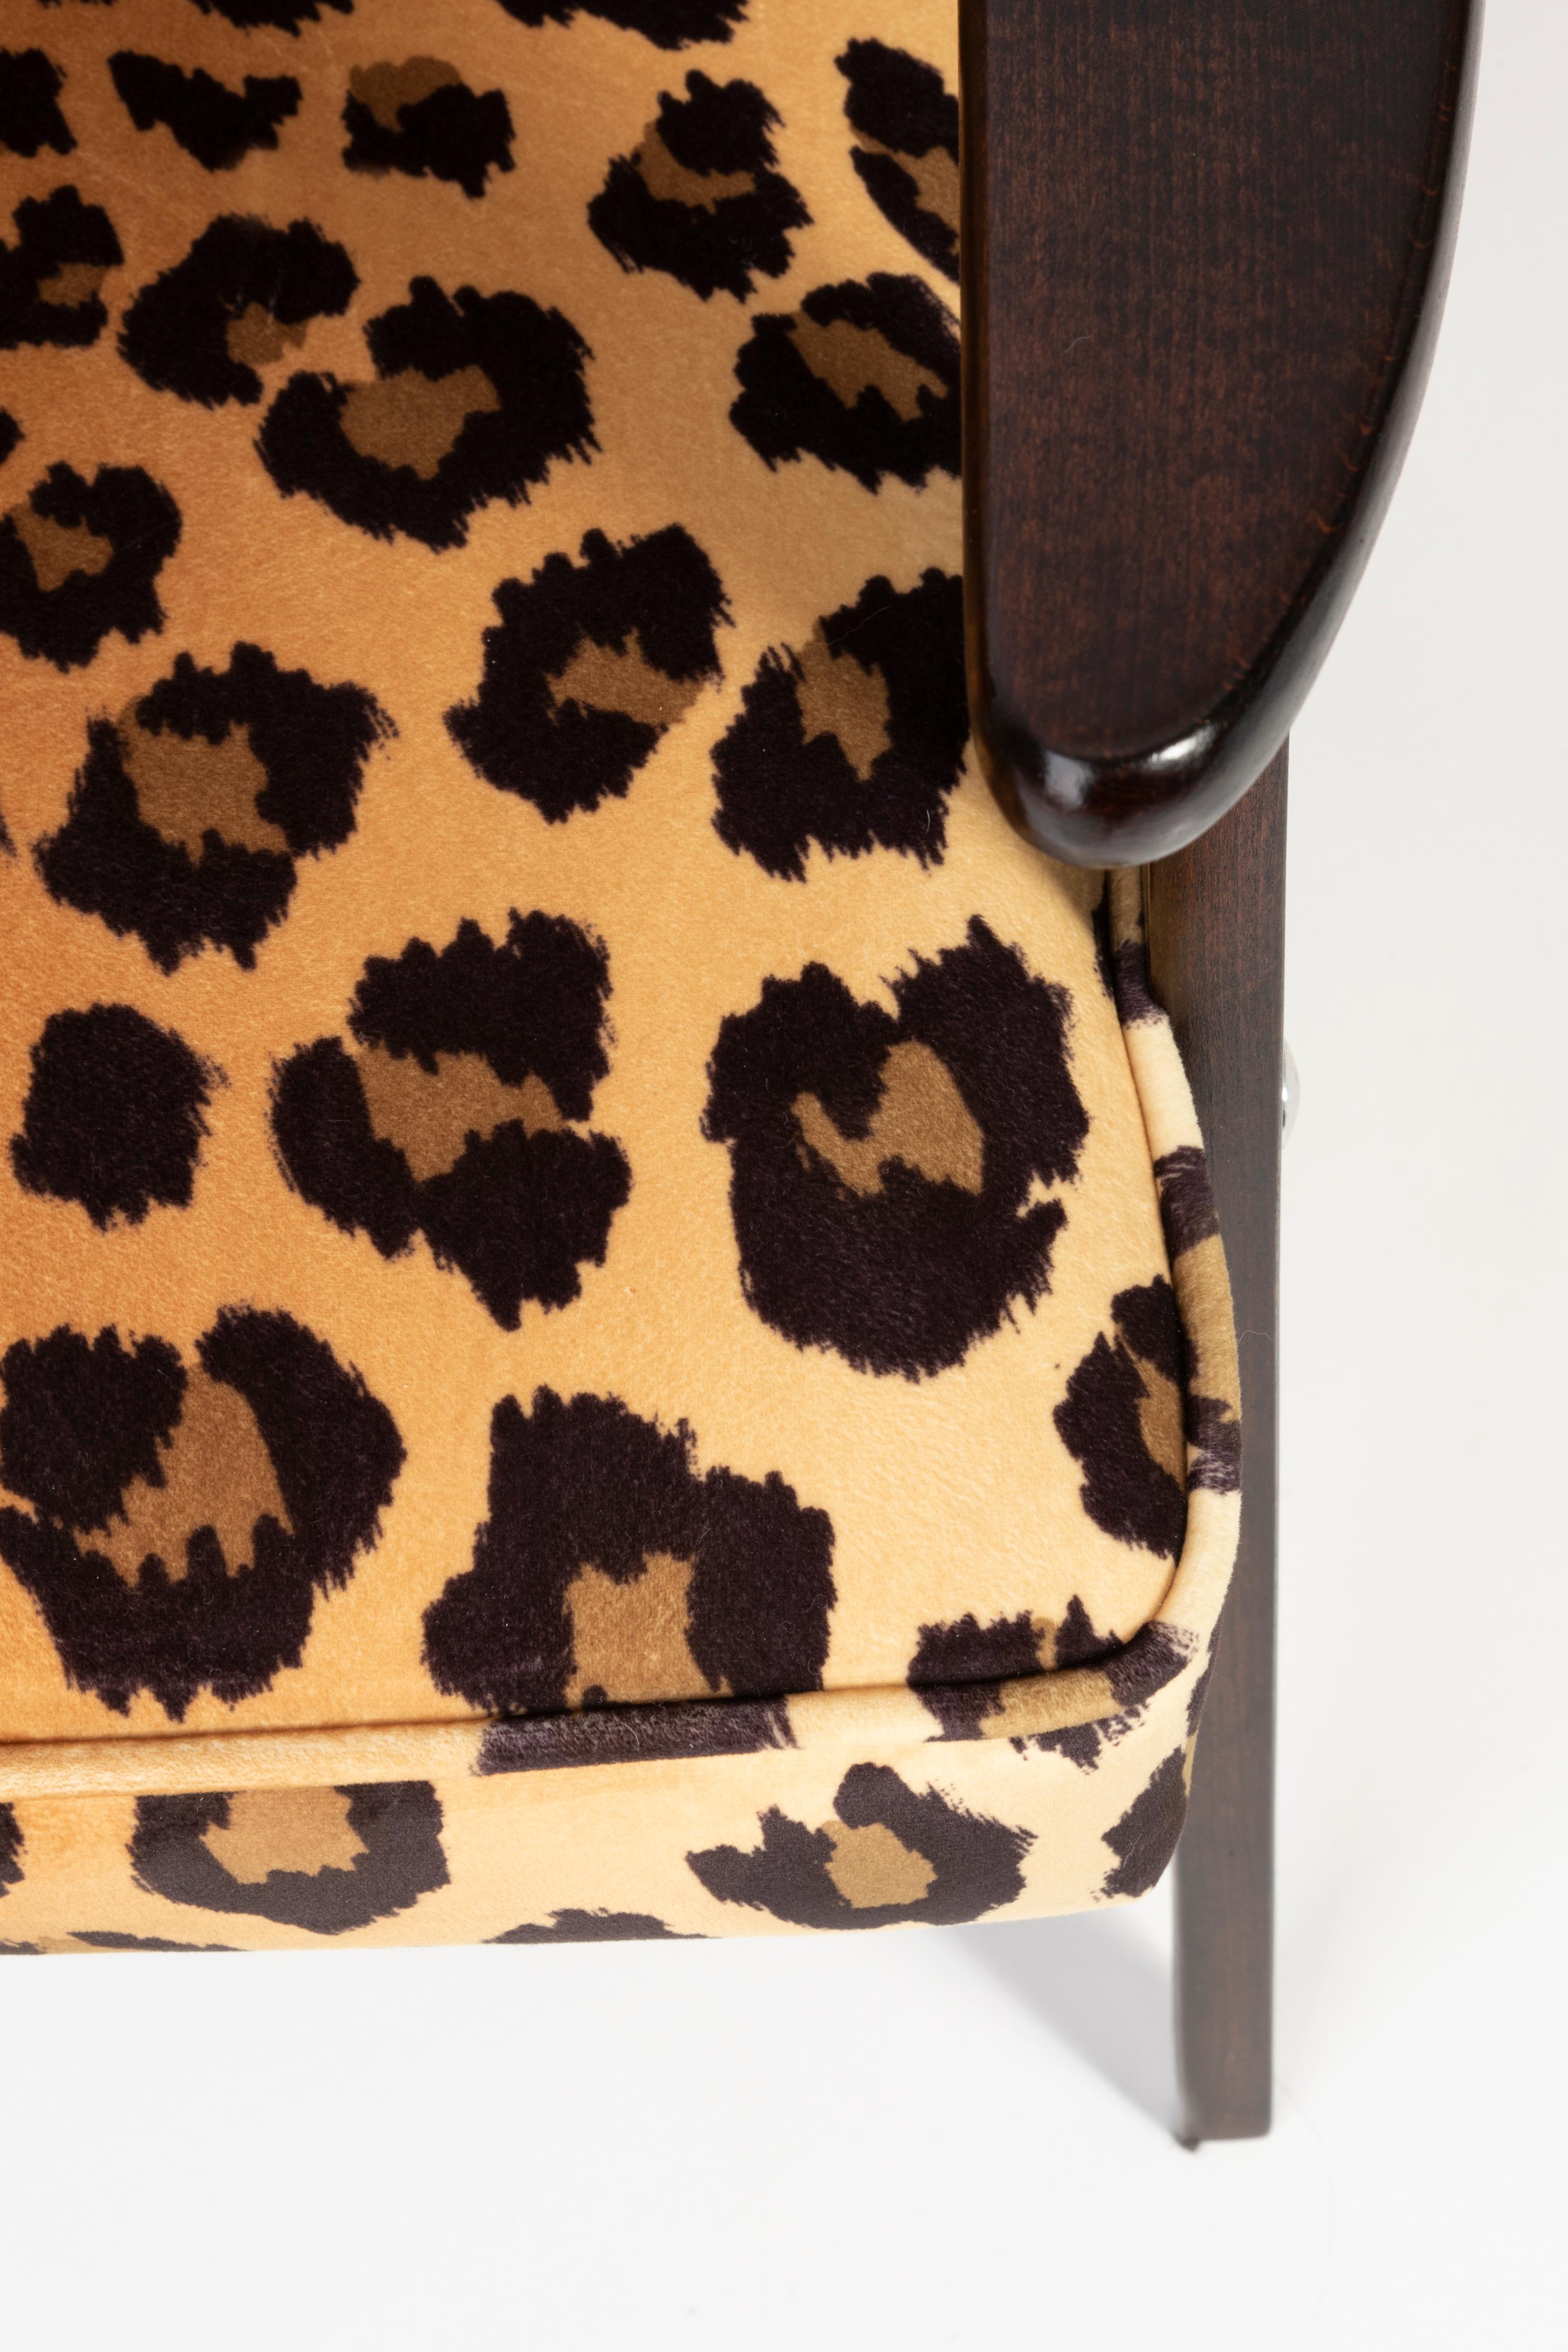 Two Midcentury 366 Armchairs in Leopard Print Velvet, Jozef Chierowski, 1960s For Sale 2